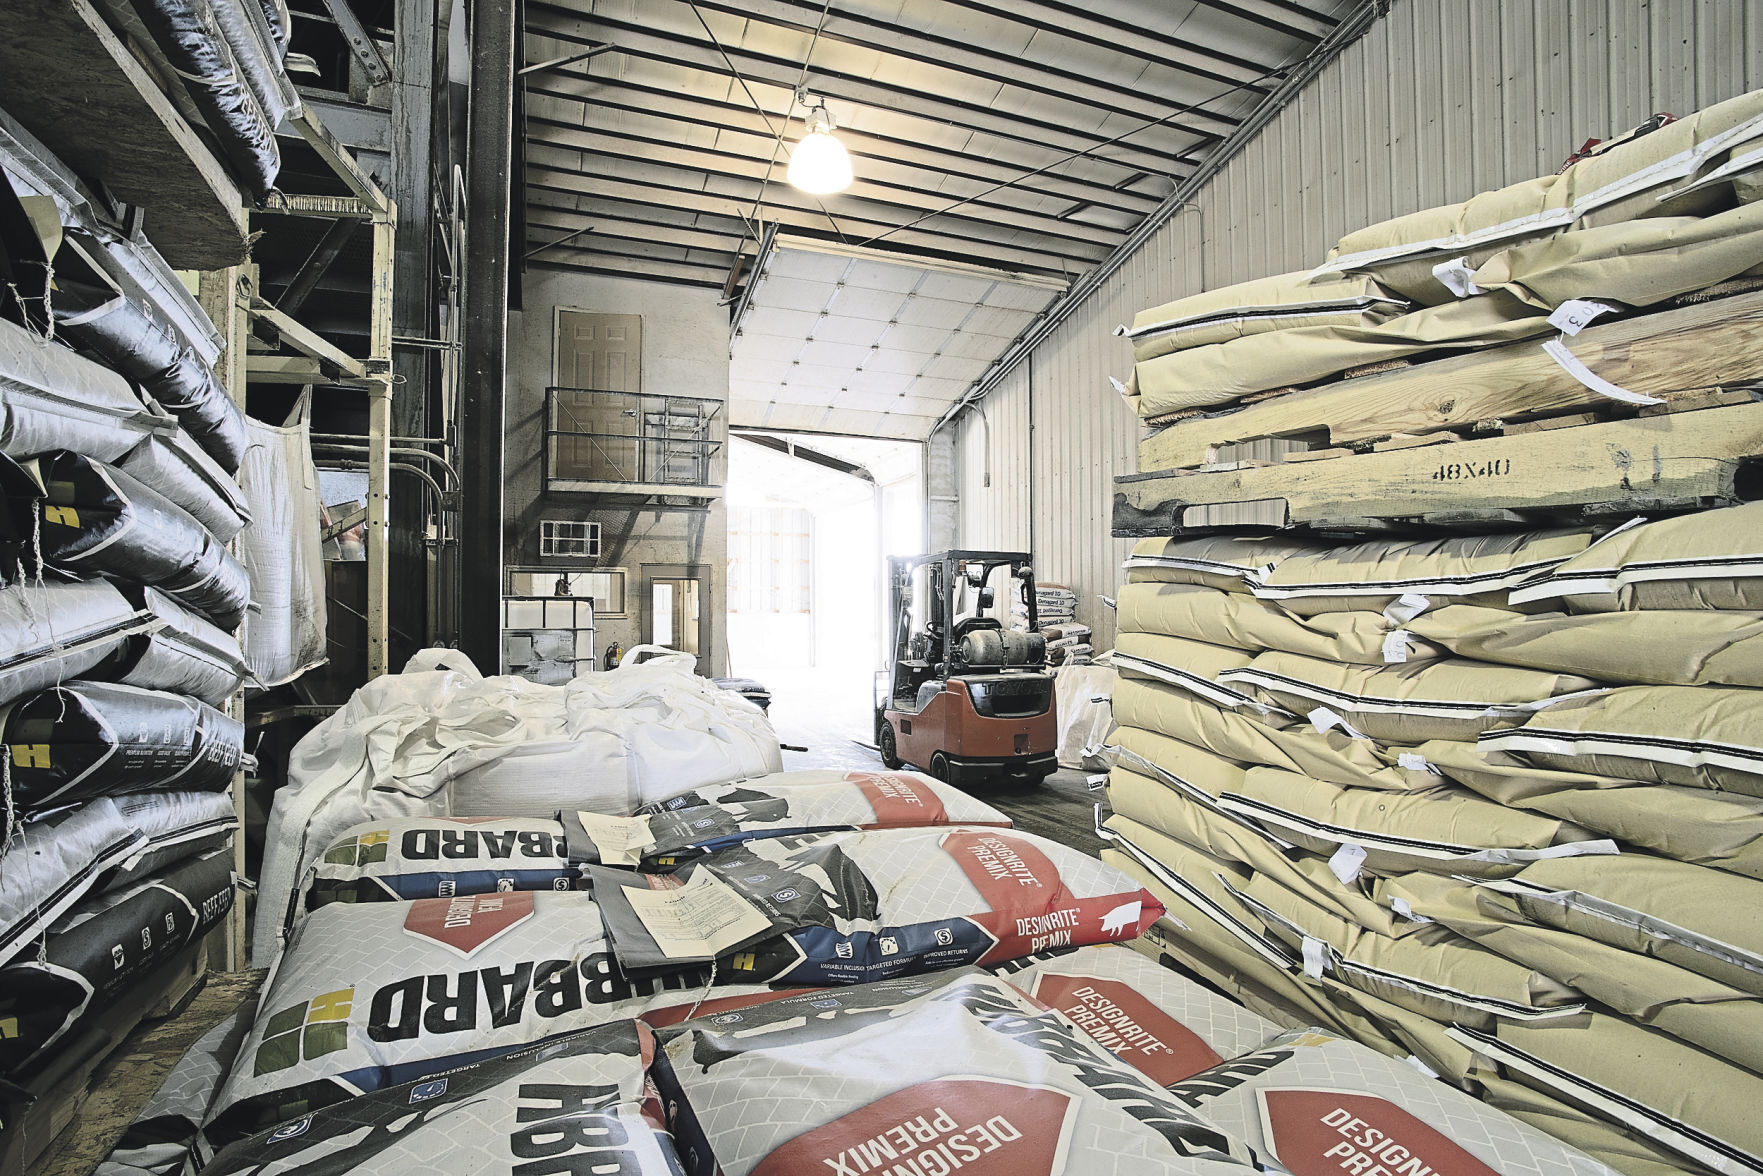 Bags of feed are stacked high at L&S Ag Center in Worthington, Iowa.    PHOTO CREDIT: Stephen Gassman